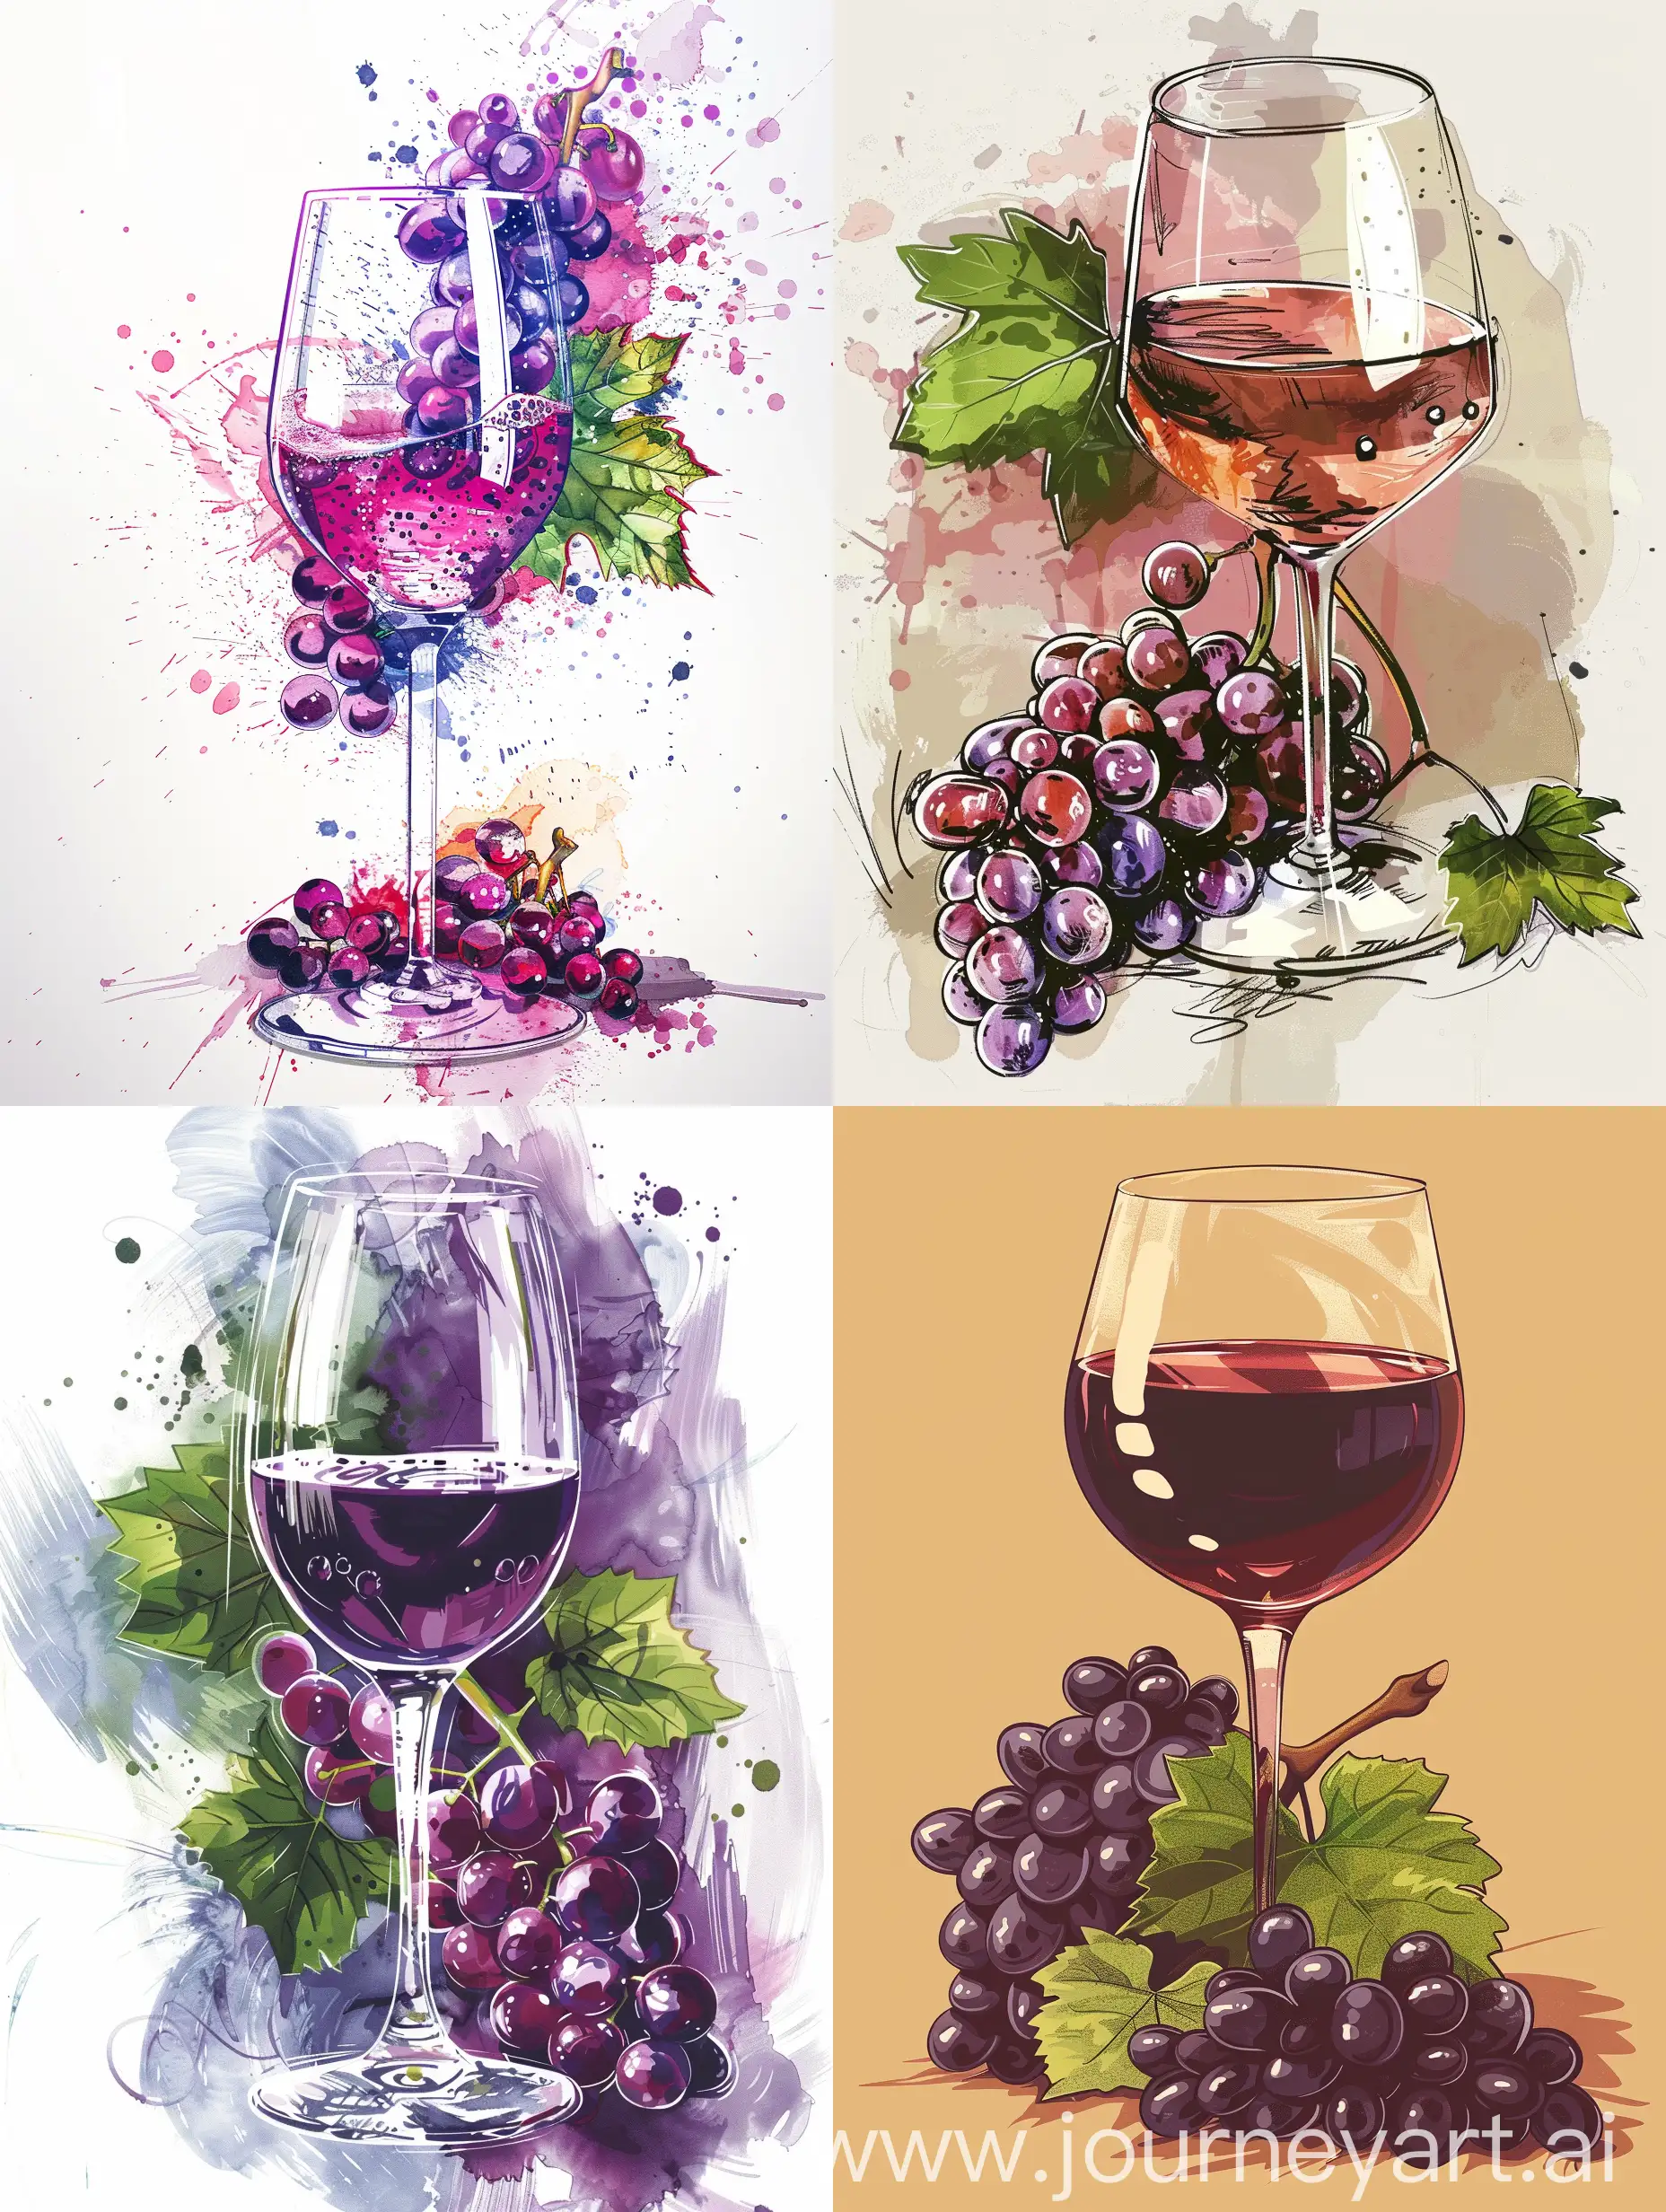 Abstract-Illustration-of-Wine-Making-Process-with-Wine-Glass-and-Grapes